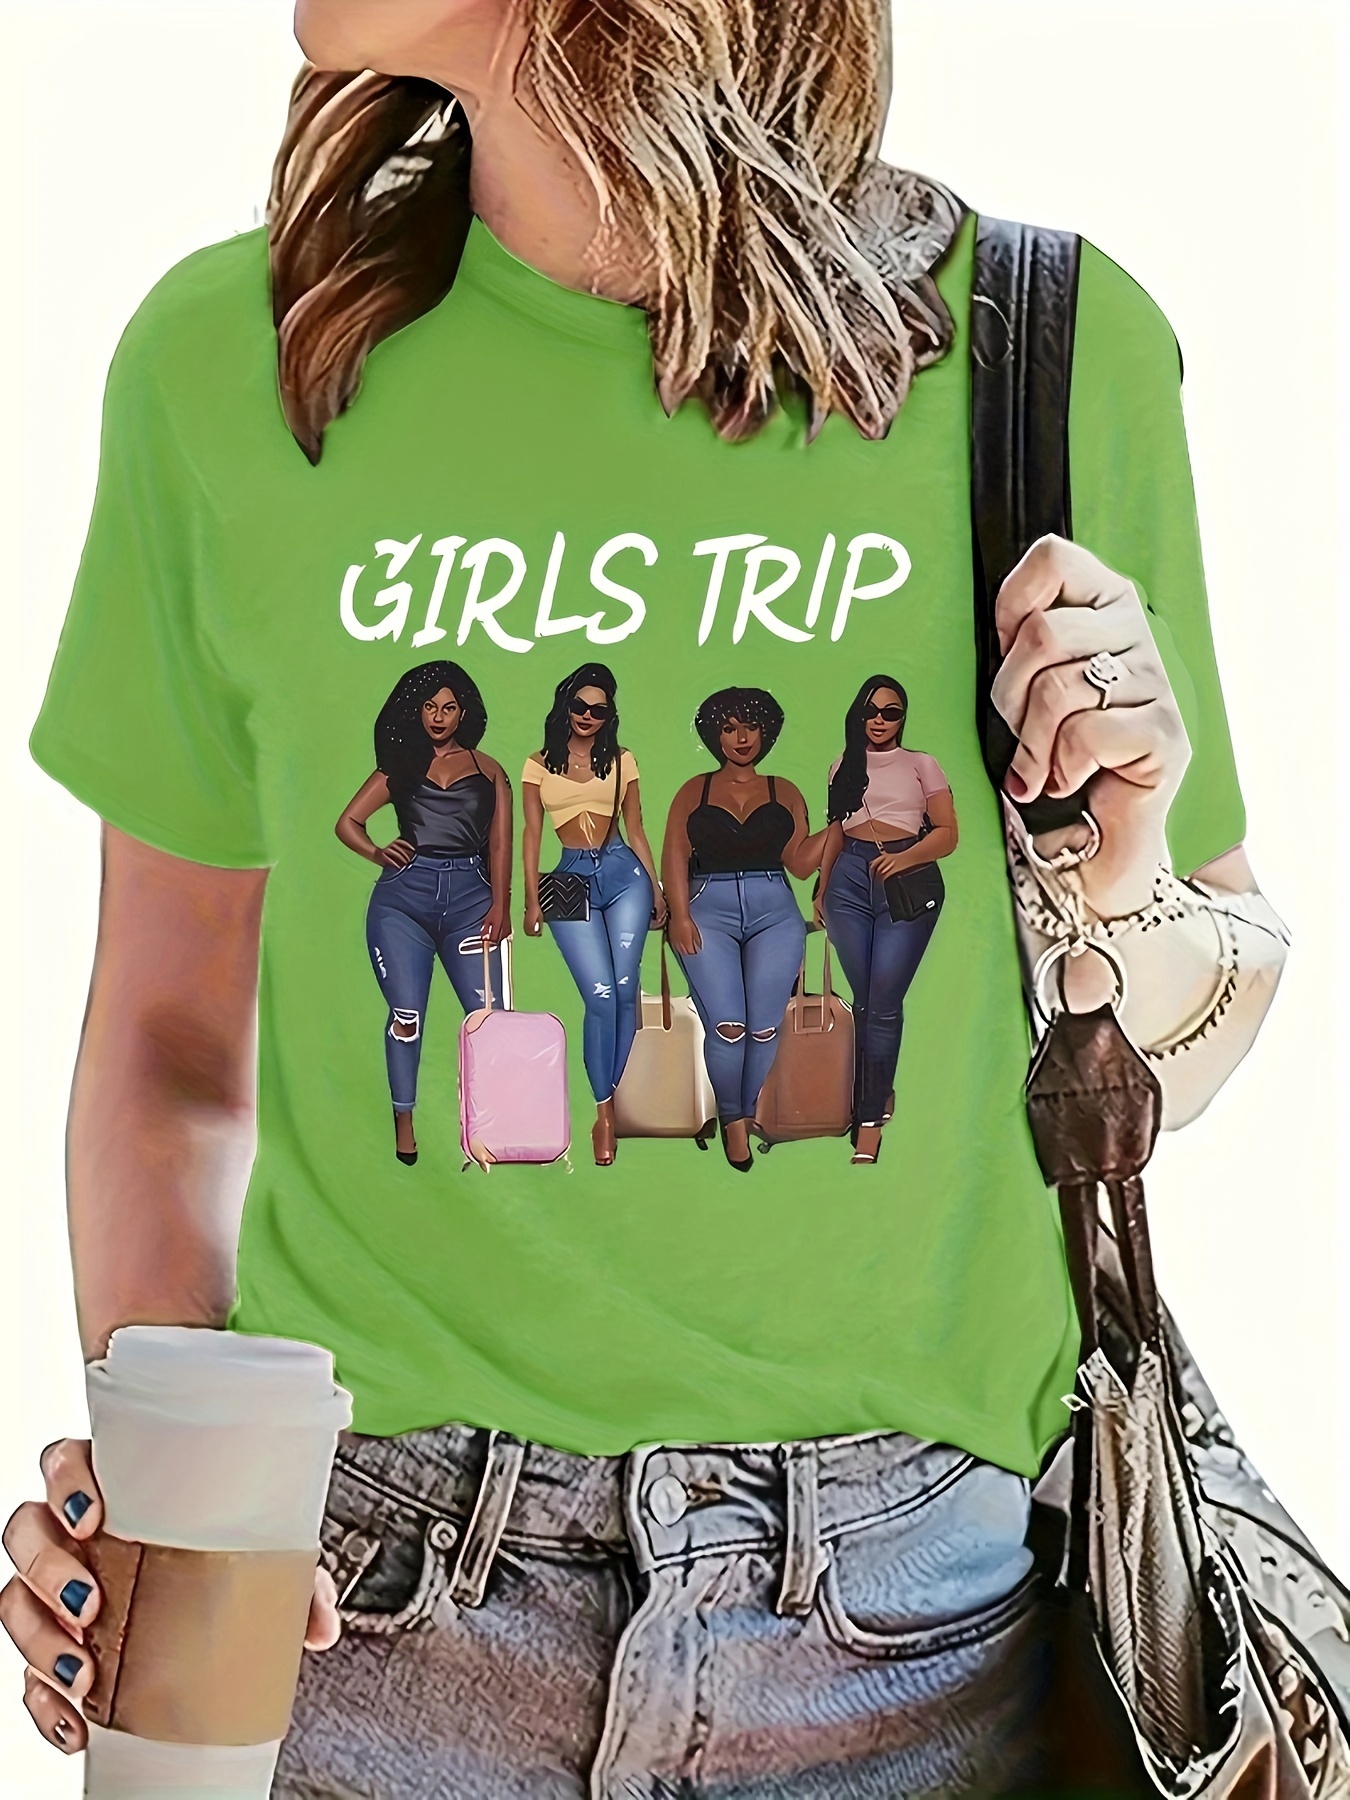 Just A Small Town Girl Mantra Shirt Women's Fashion